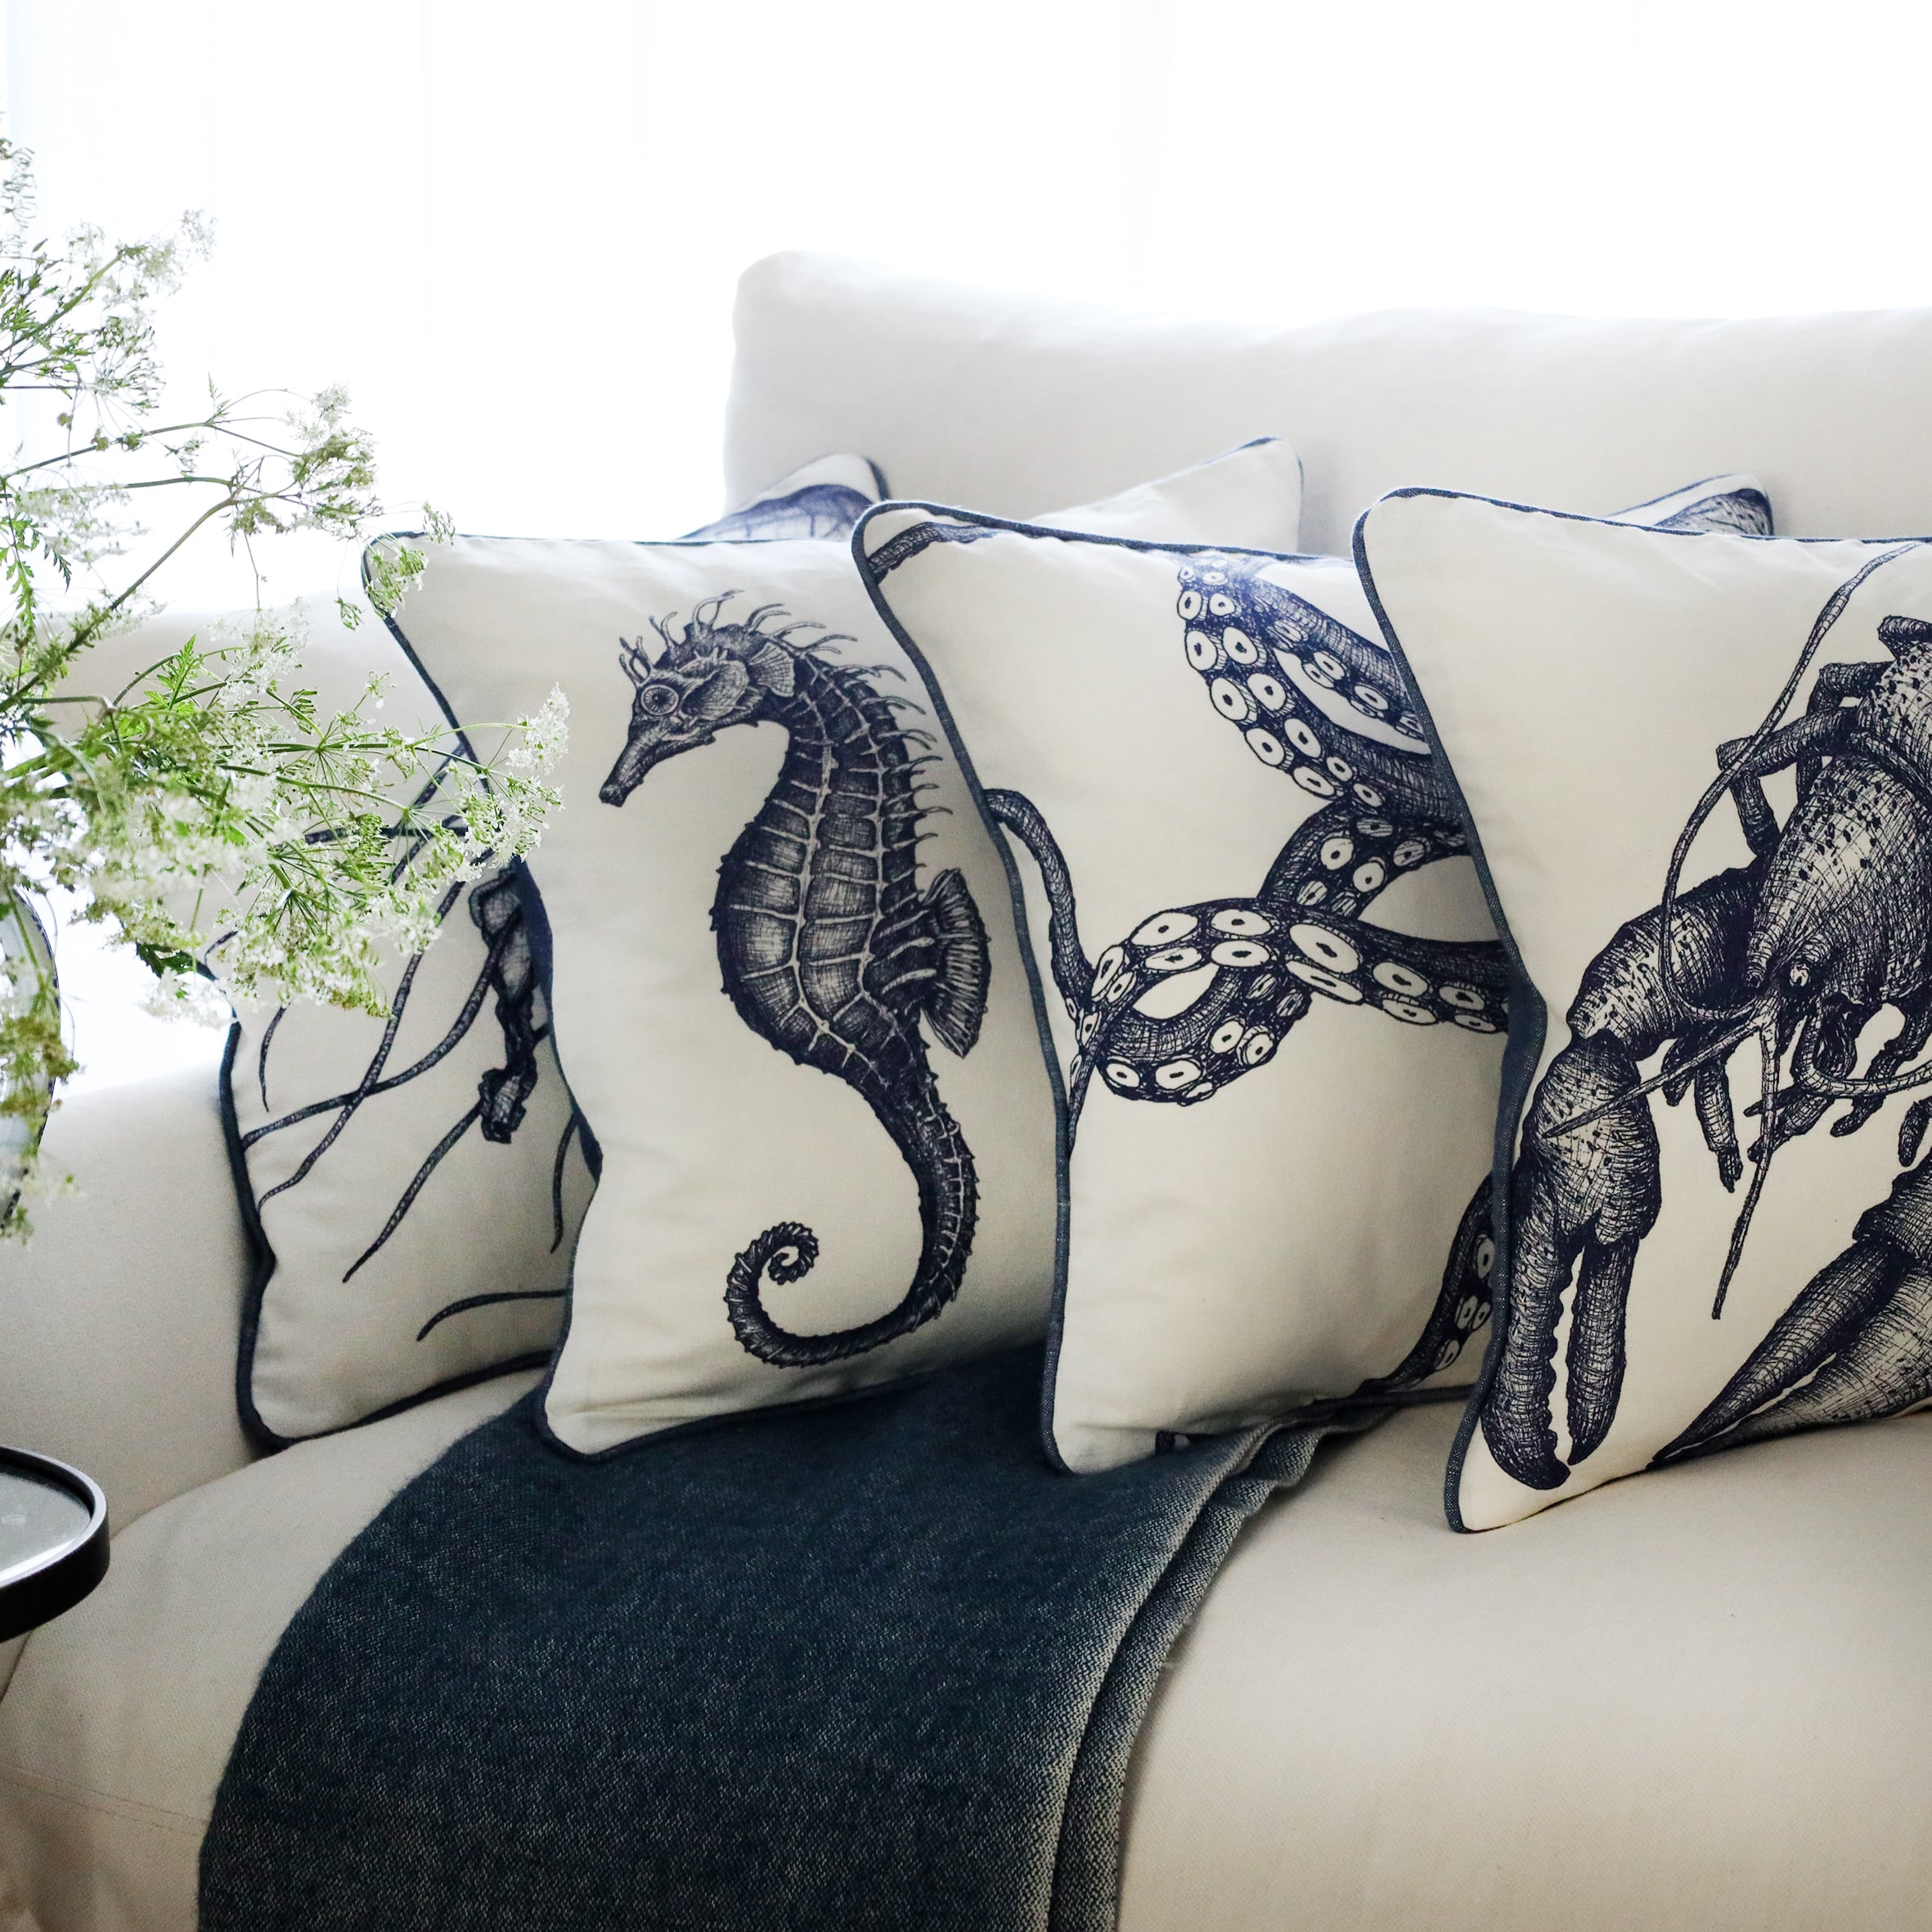 row of 4 blue & white illustrated sea creature cushions with a lobster cushion at the front, sitting on a navy throw on a white sofa with bright sunlight window behind and a large willow pattern jug filled with cow parsley